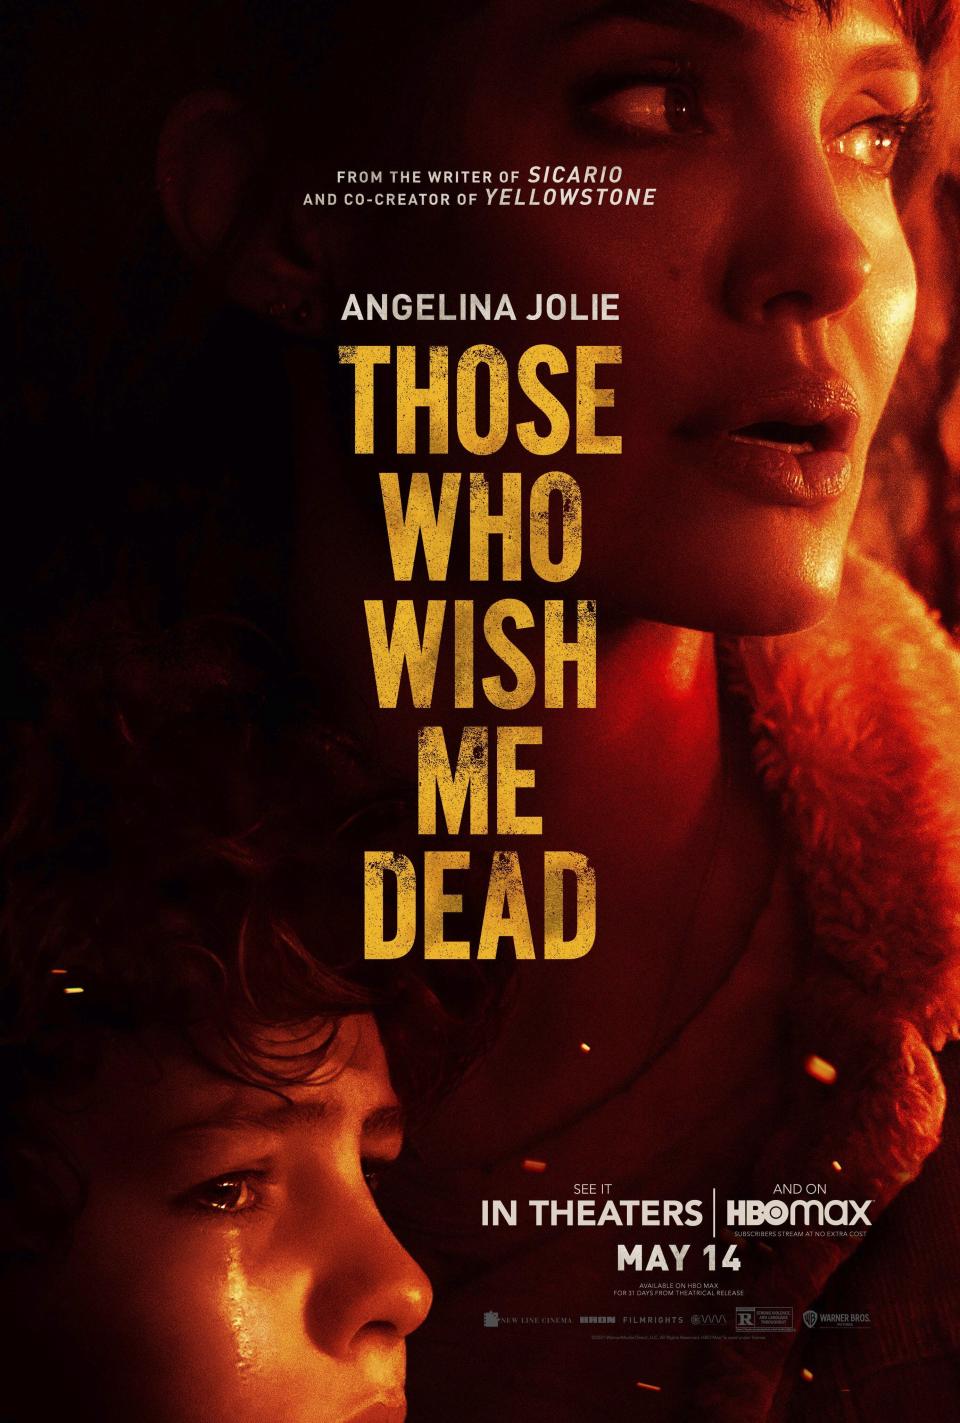 This image released by Warner Bros. Pictures shows promotional art for "Those Who Wish Me Dead," a film starring Angelina Jolie, premieres in theaters and on HBO Max on May 14. (Warner Bros. Pictures via AP)